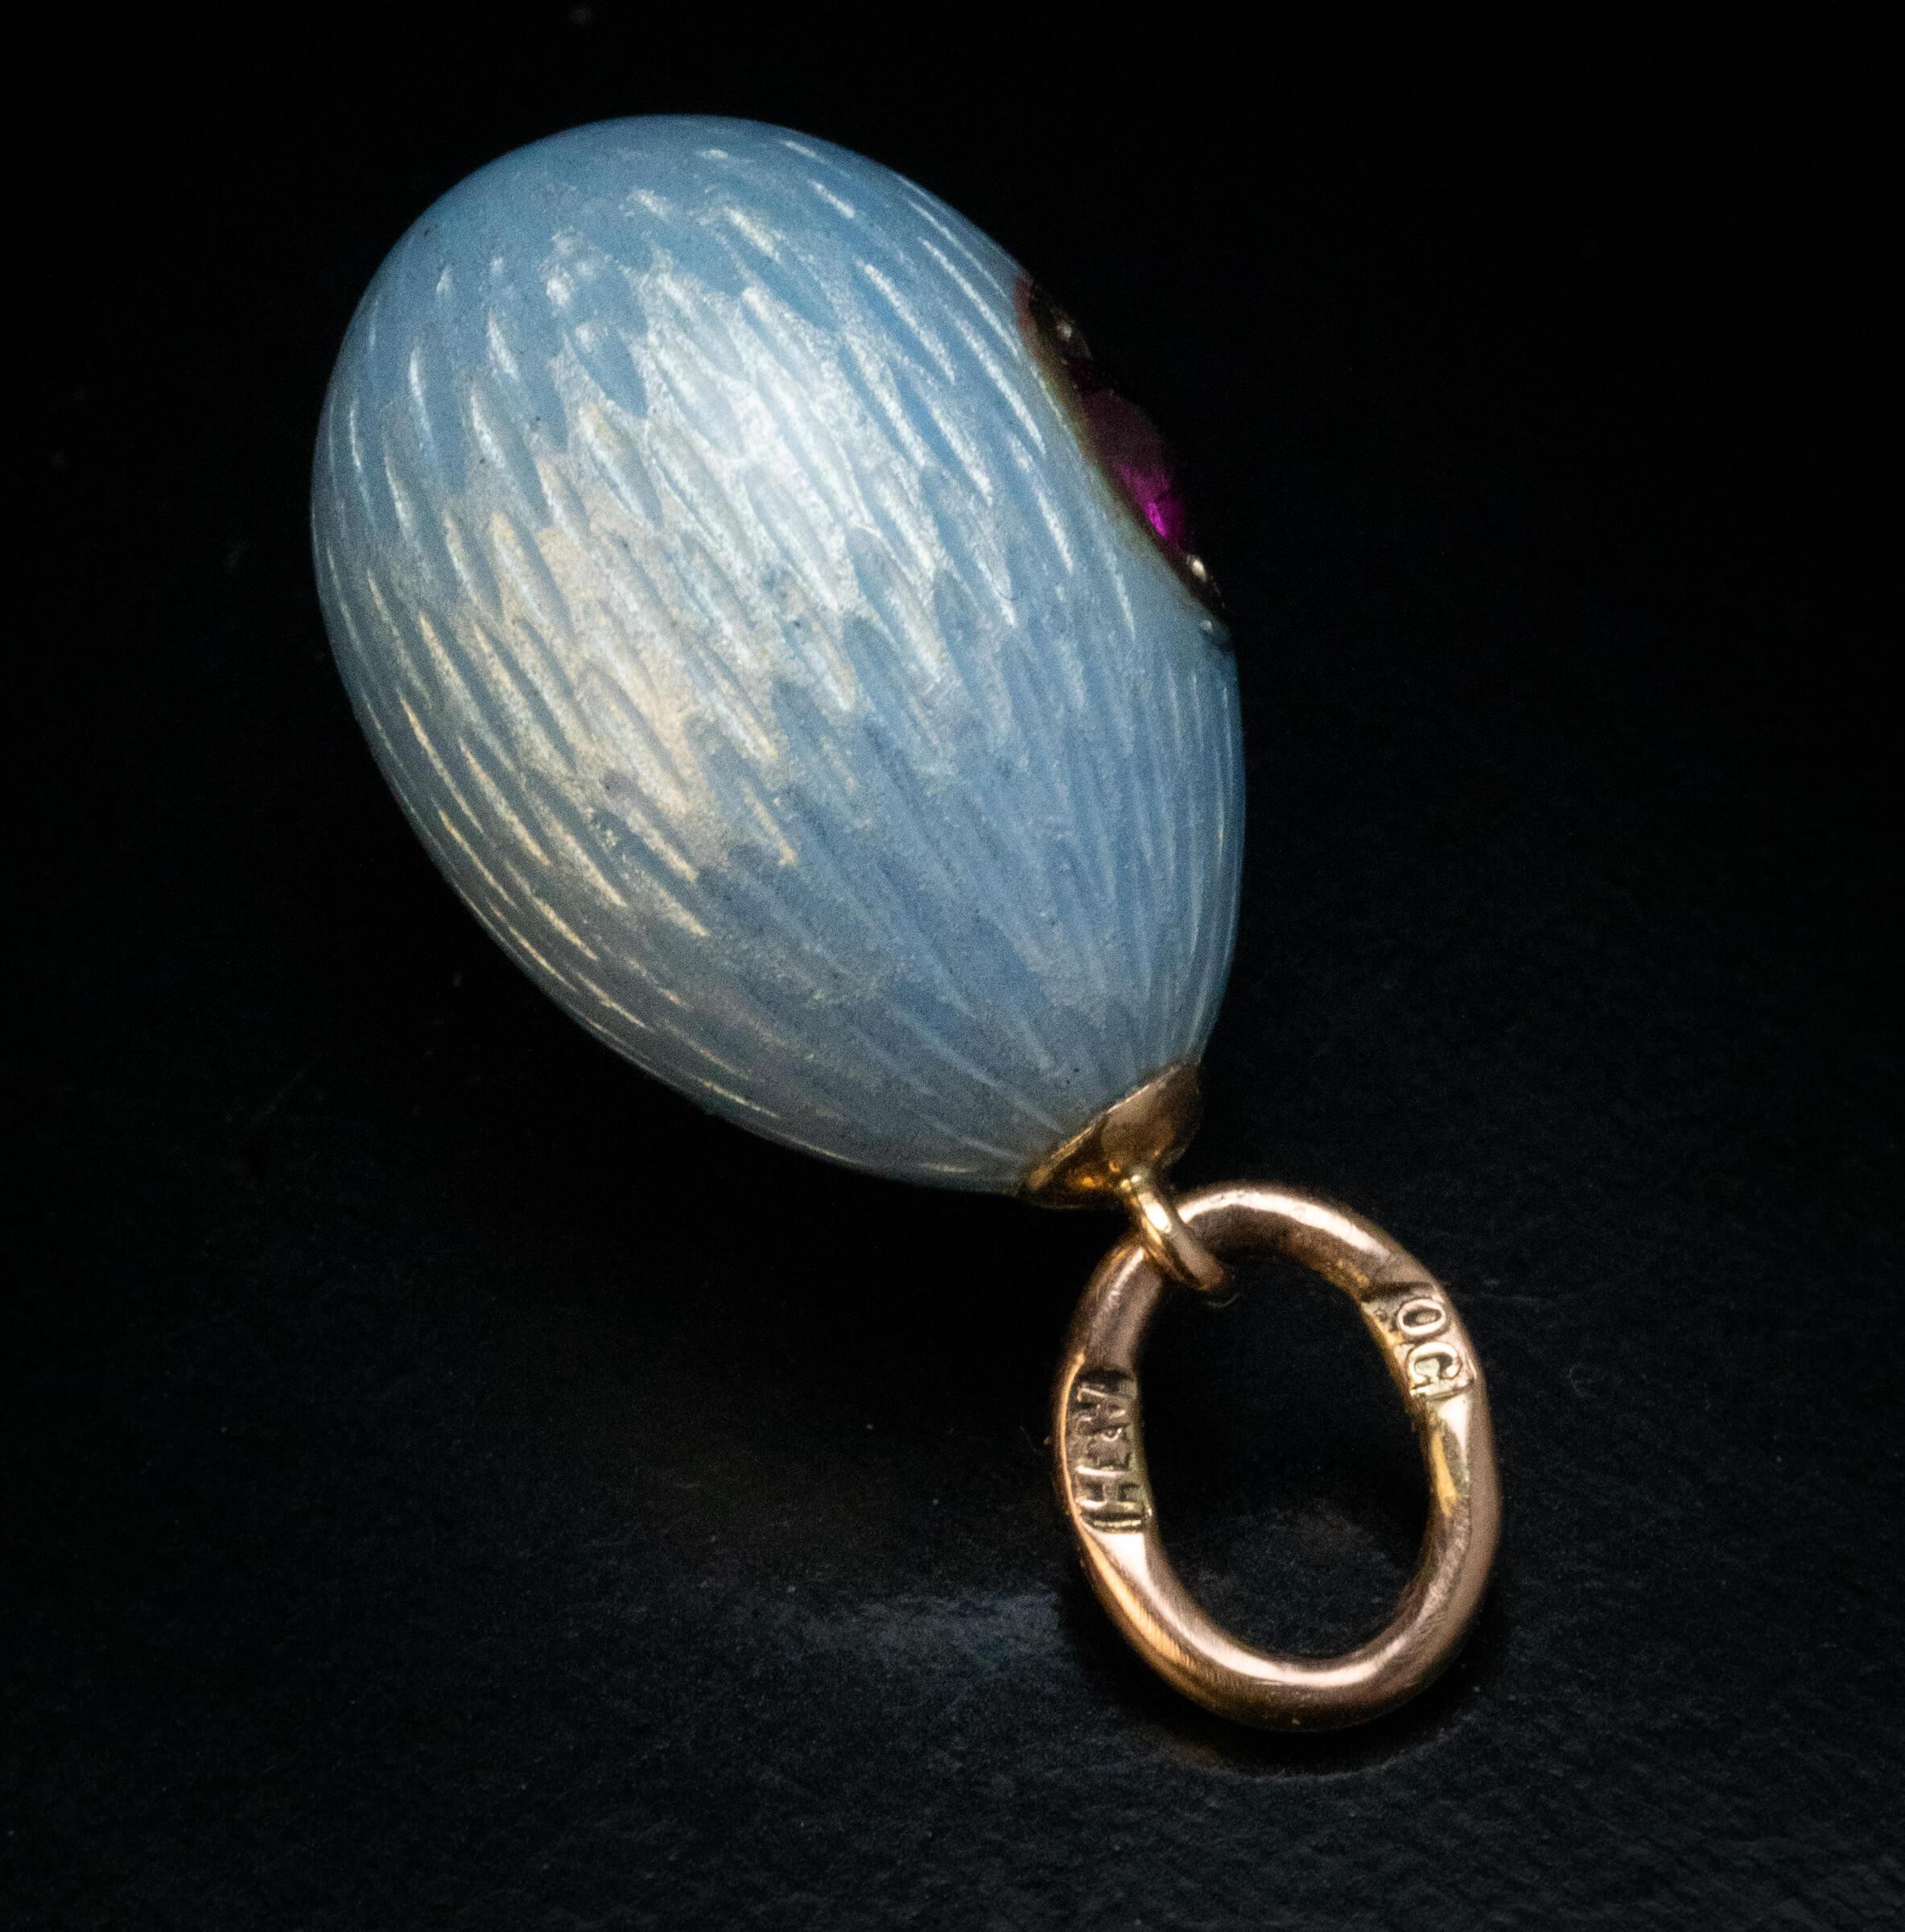 Made in Saint Petersburg between 1908 and 1917.  This FABERGE miniature egg is covered with a silver blue translucent guilloche enamel of a very fine quality. One side of the egg is embellished with a ruby.  The egg is marked with 56 zolotnik old